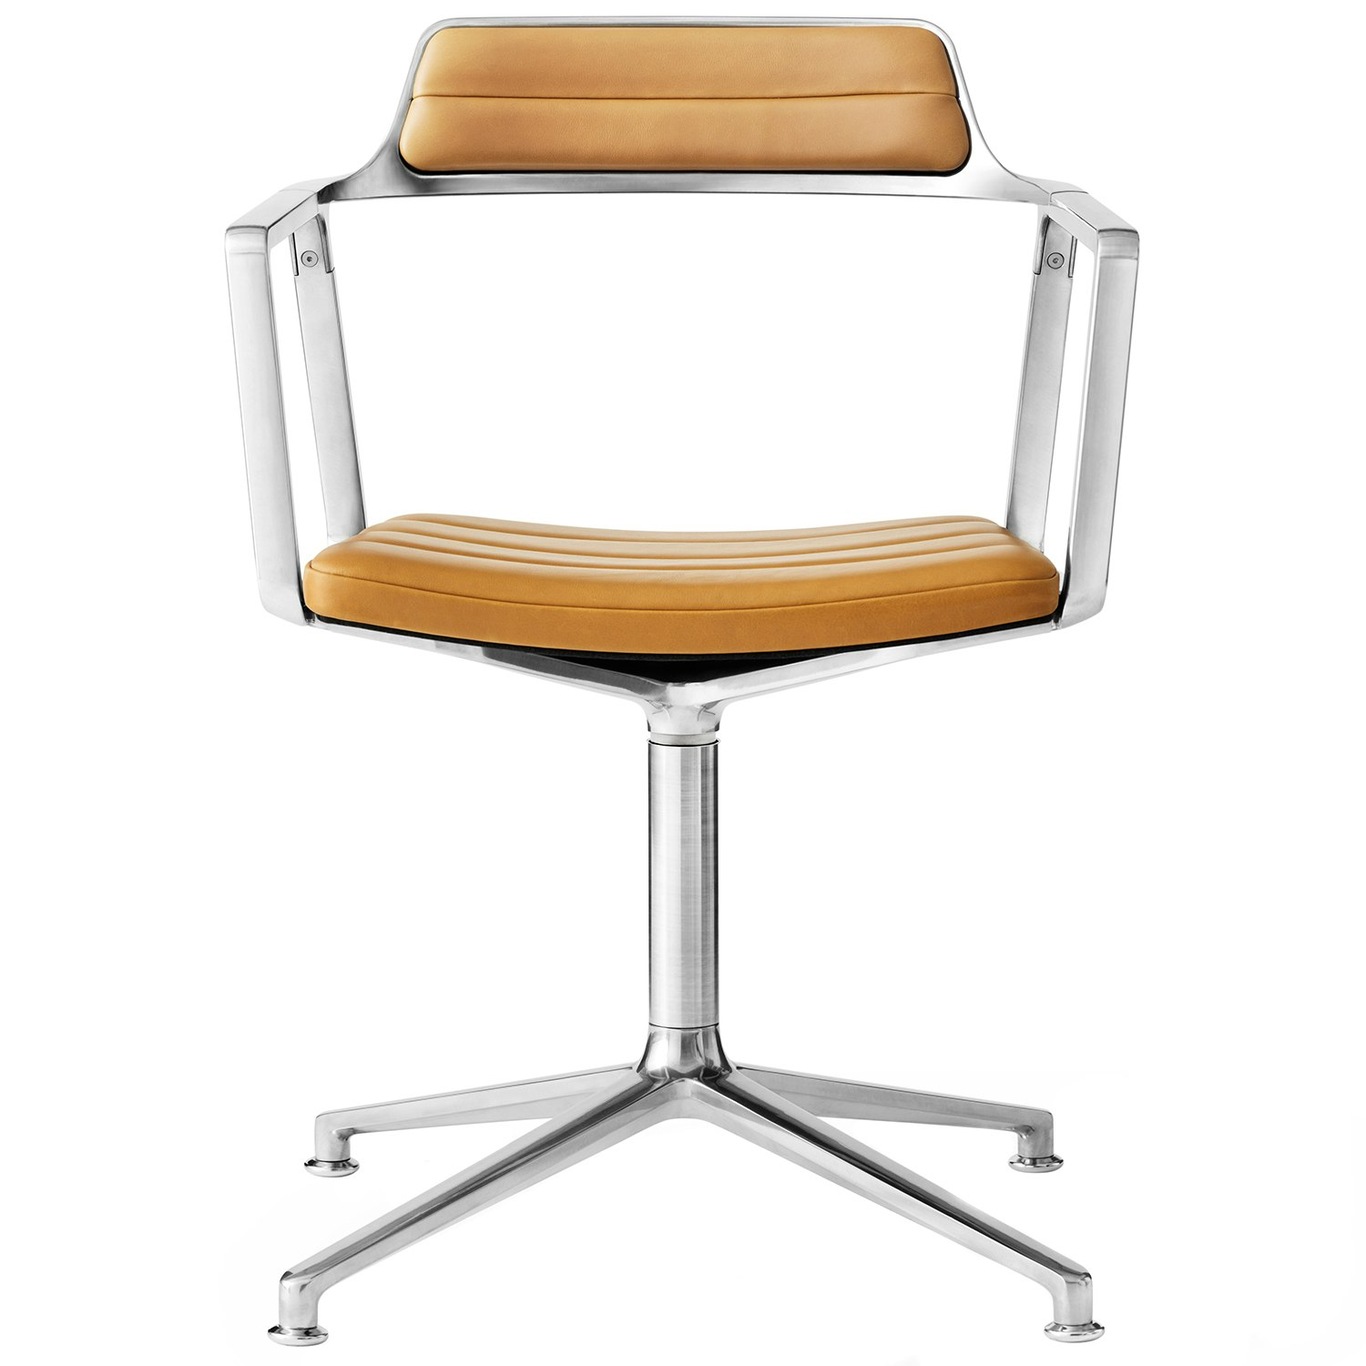 452 Swivel Chair With Feet, Polished Aluminium / Sand Coloured Leather